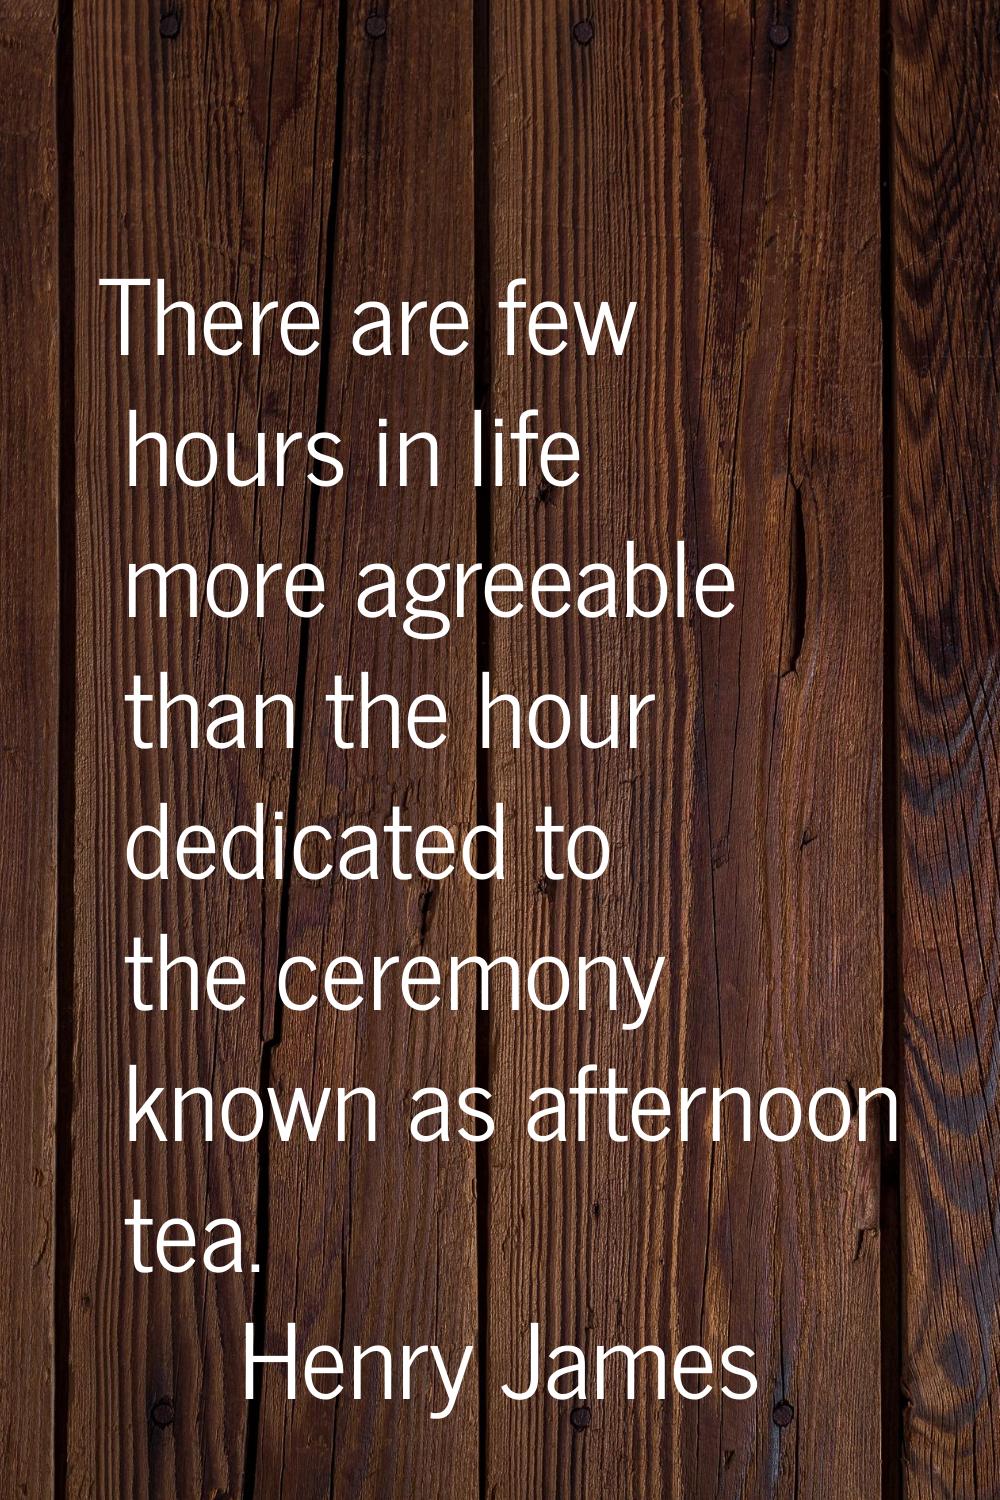 There are few hours in life more agreeable than the hour dedicated to the ceremony known as afterno